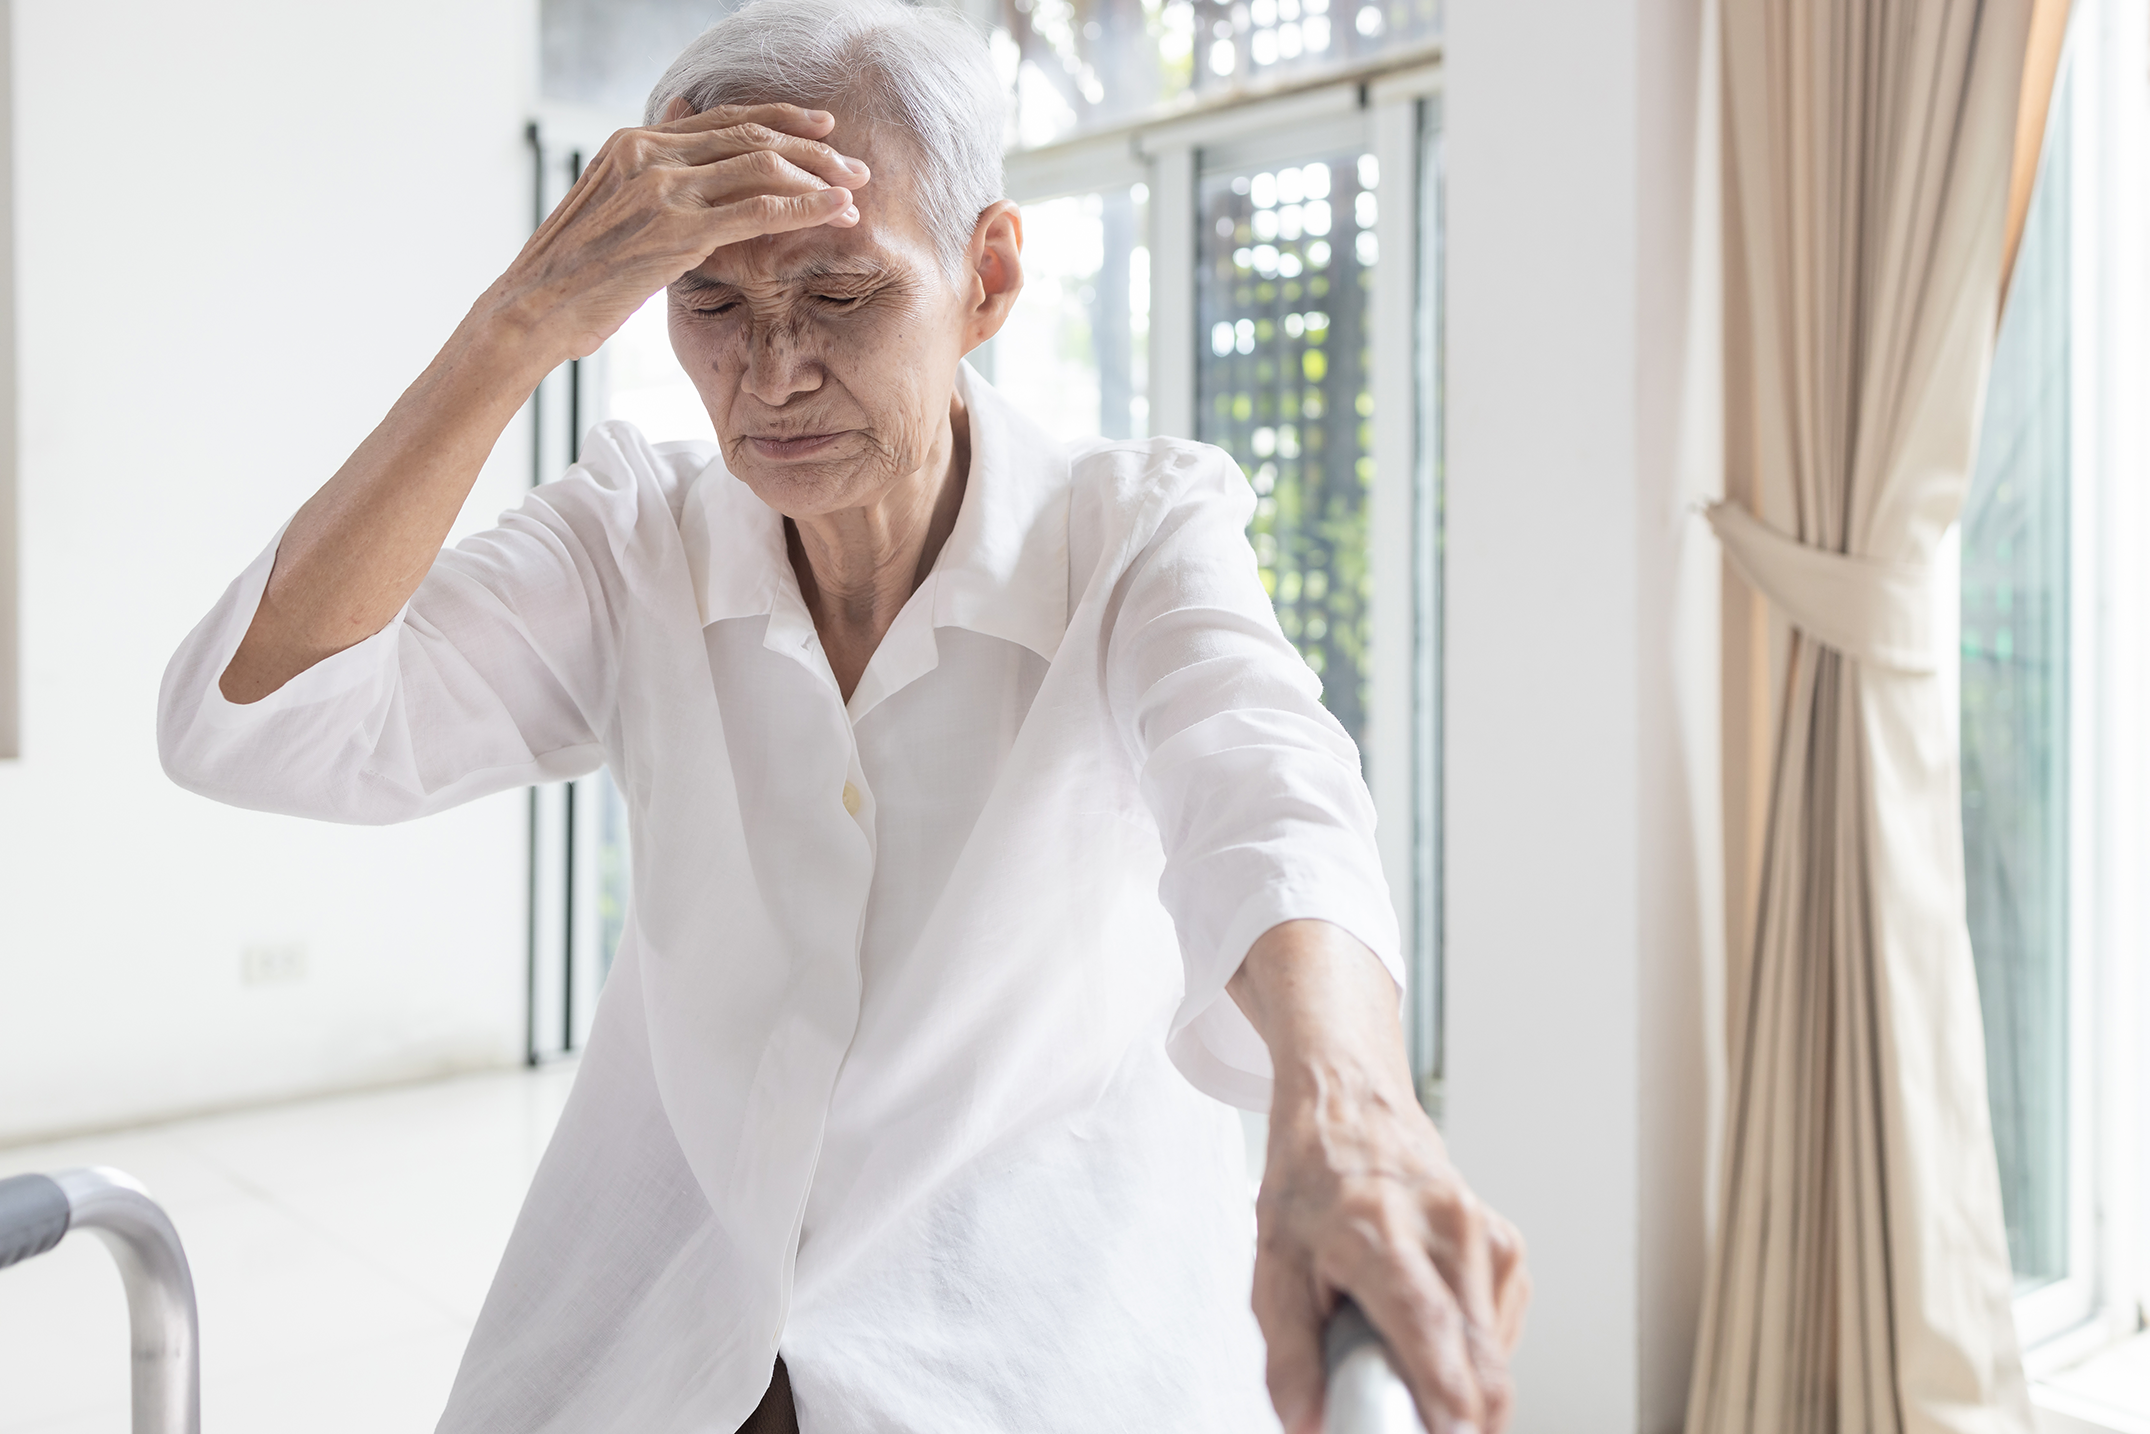 Anaemia in seniors: What to look for and how to treat it